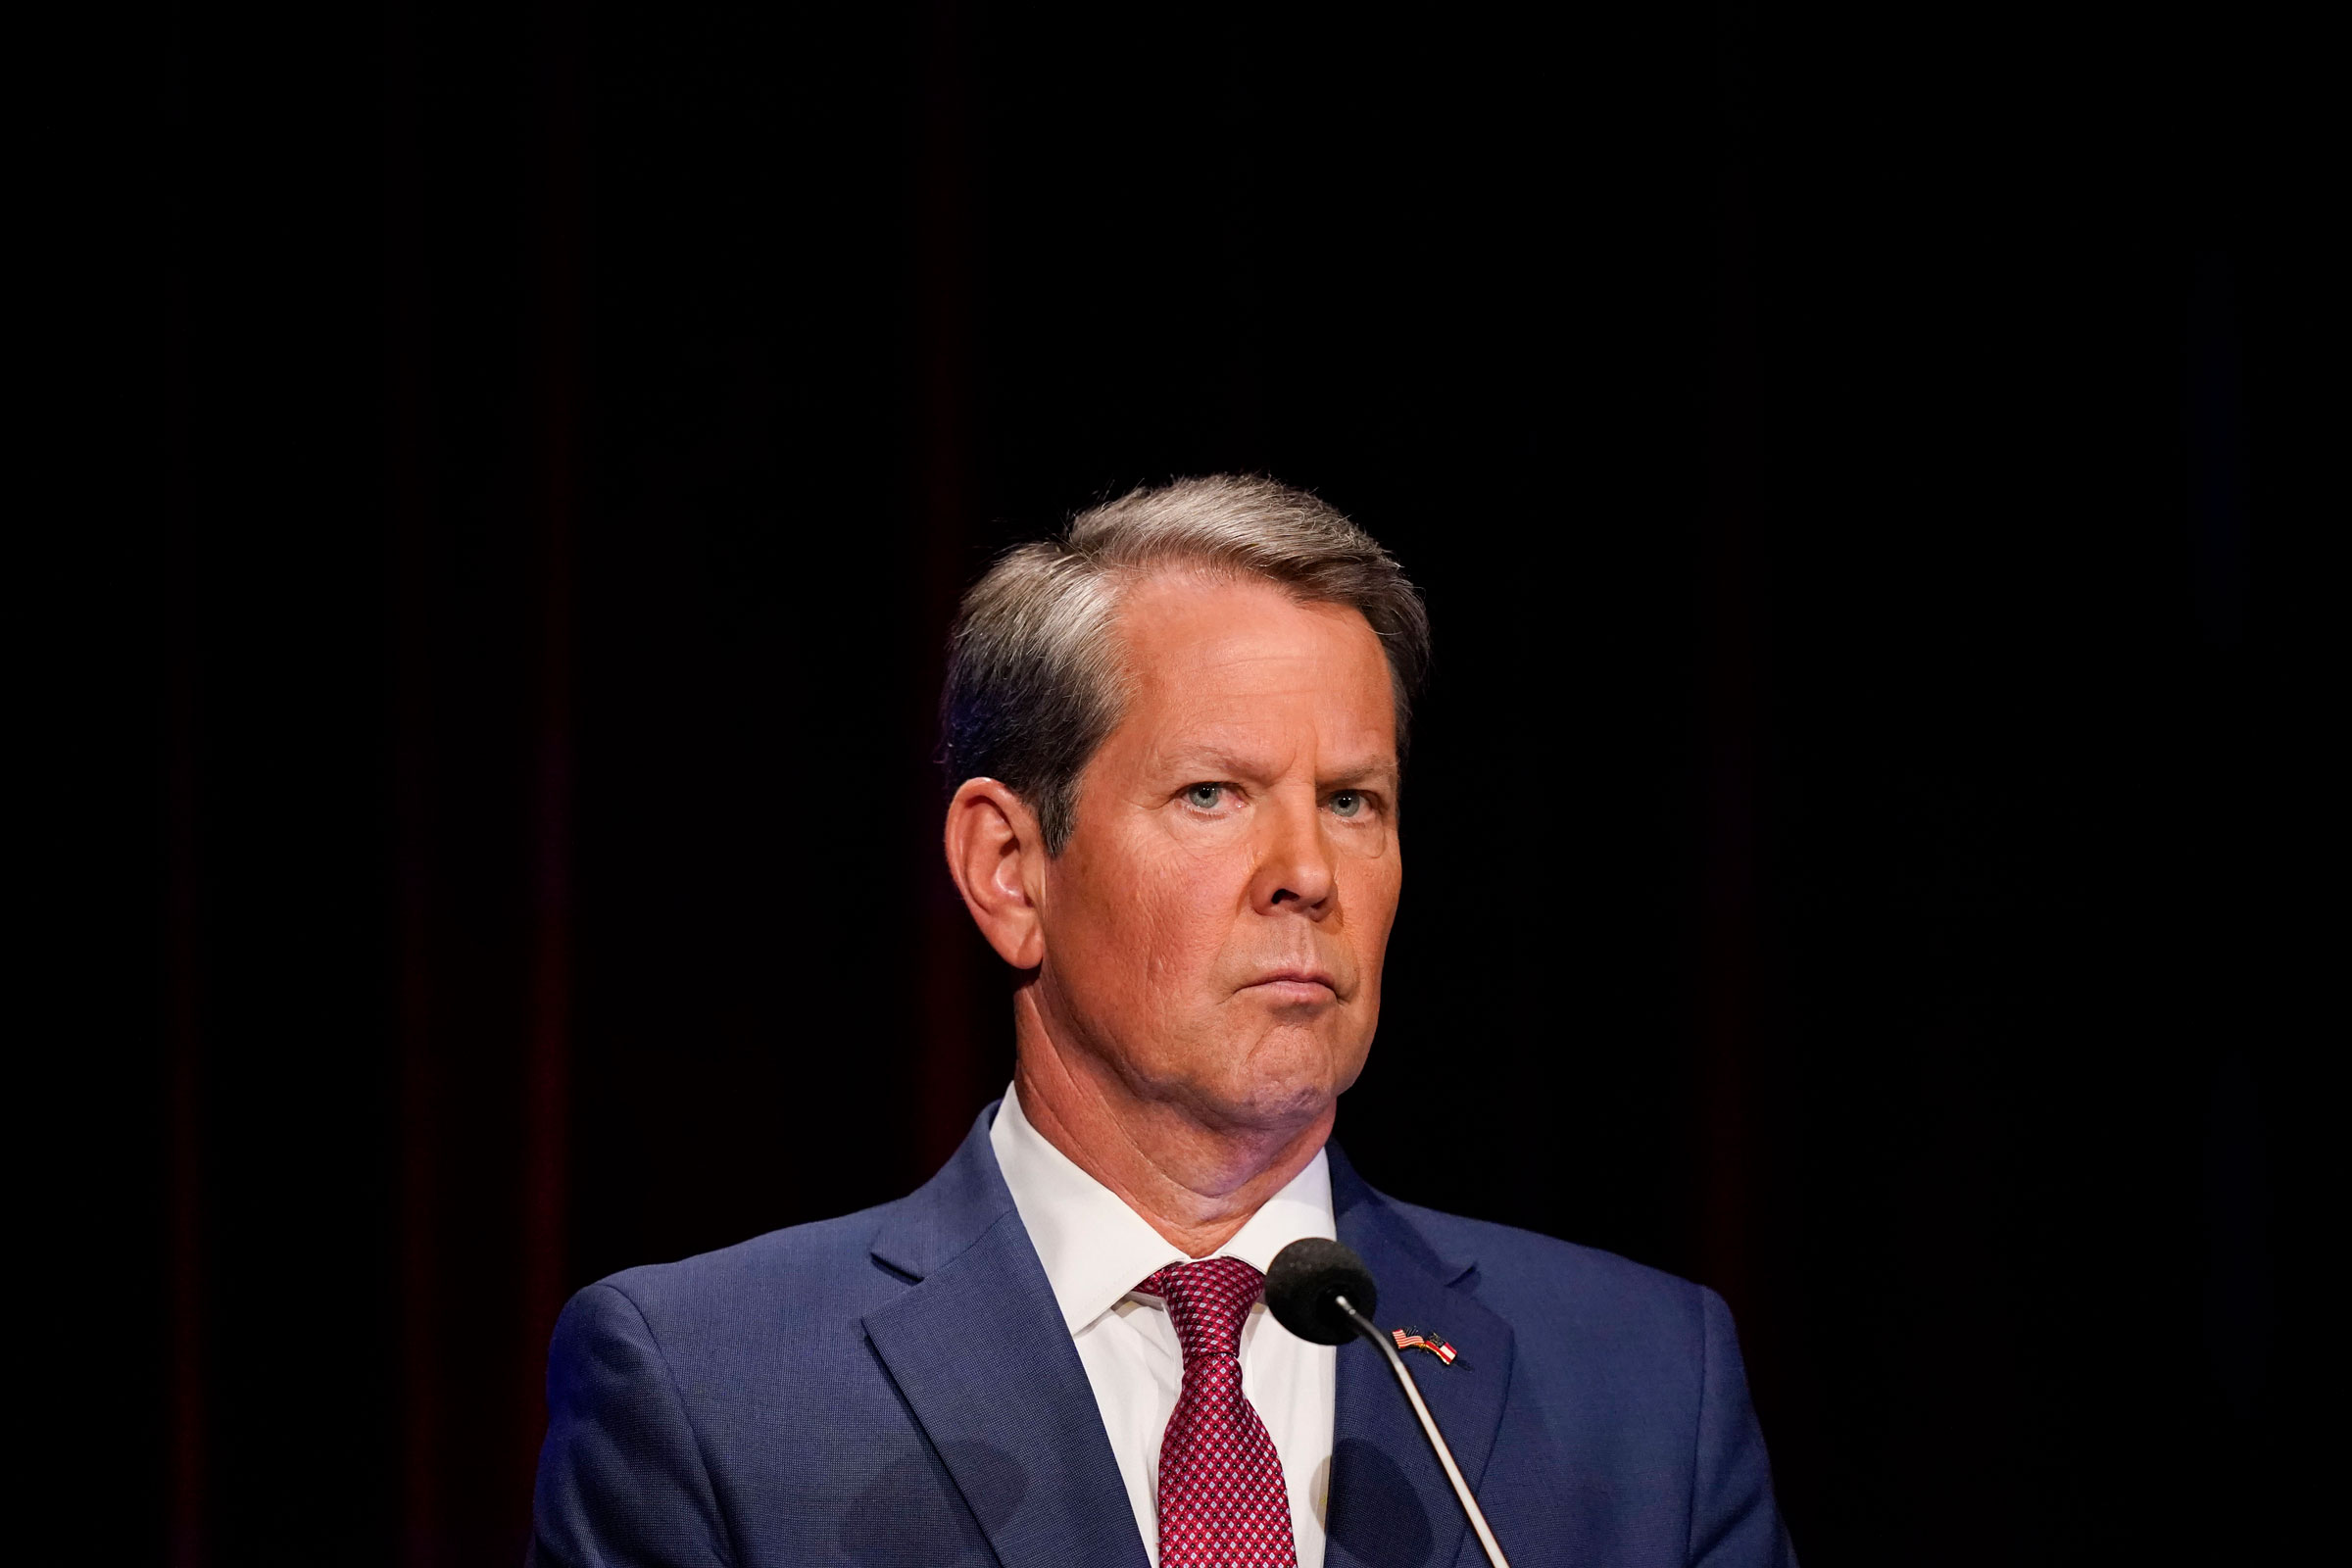 Kemp, the Republican governor of Georgia, appears poised to win reelection despite Donald Trump's best efforts to unseat him. (Brynn Anderson—AP)